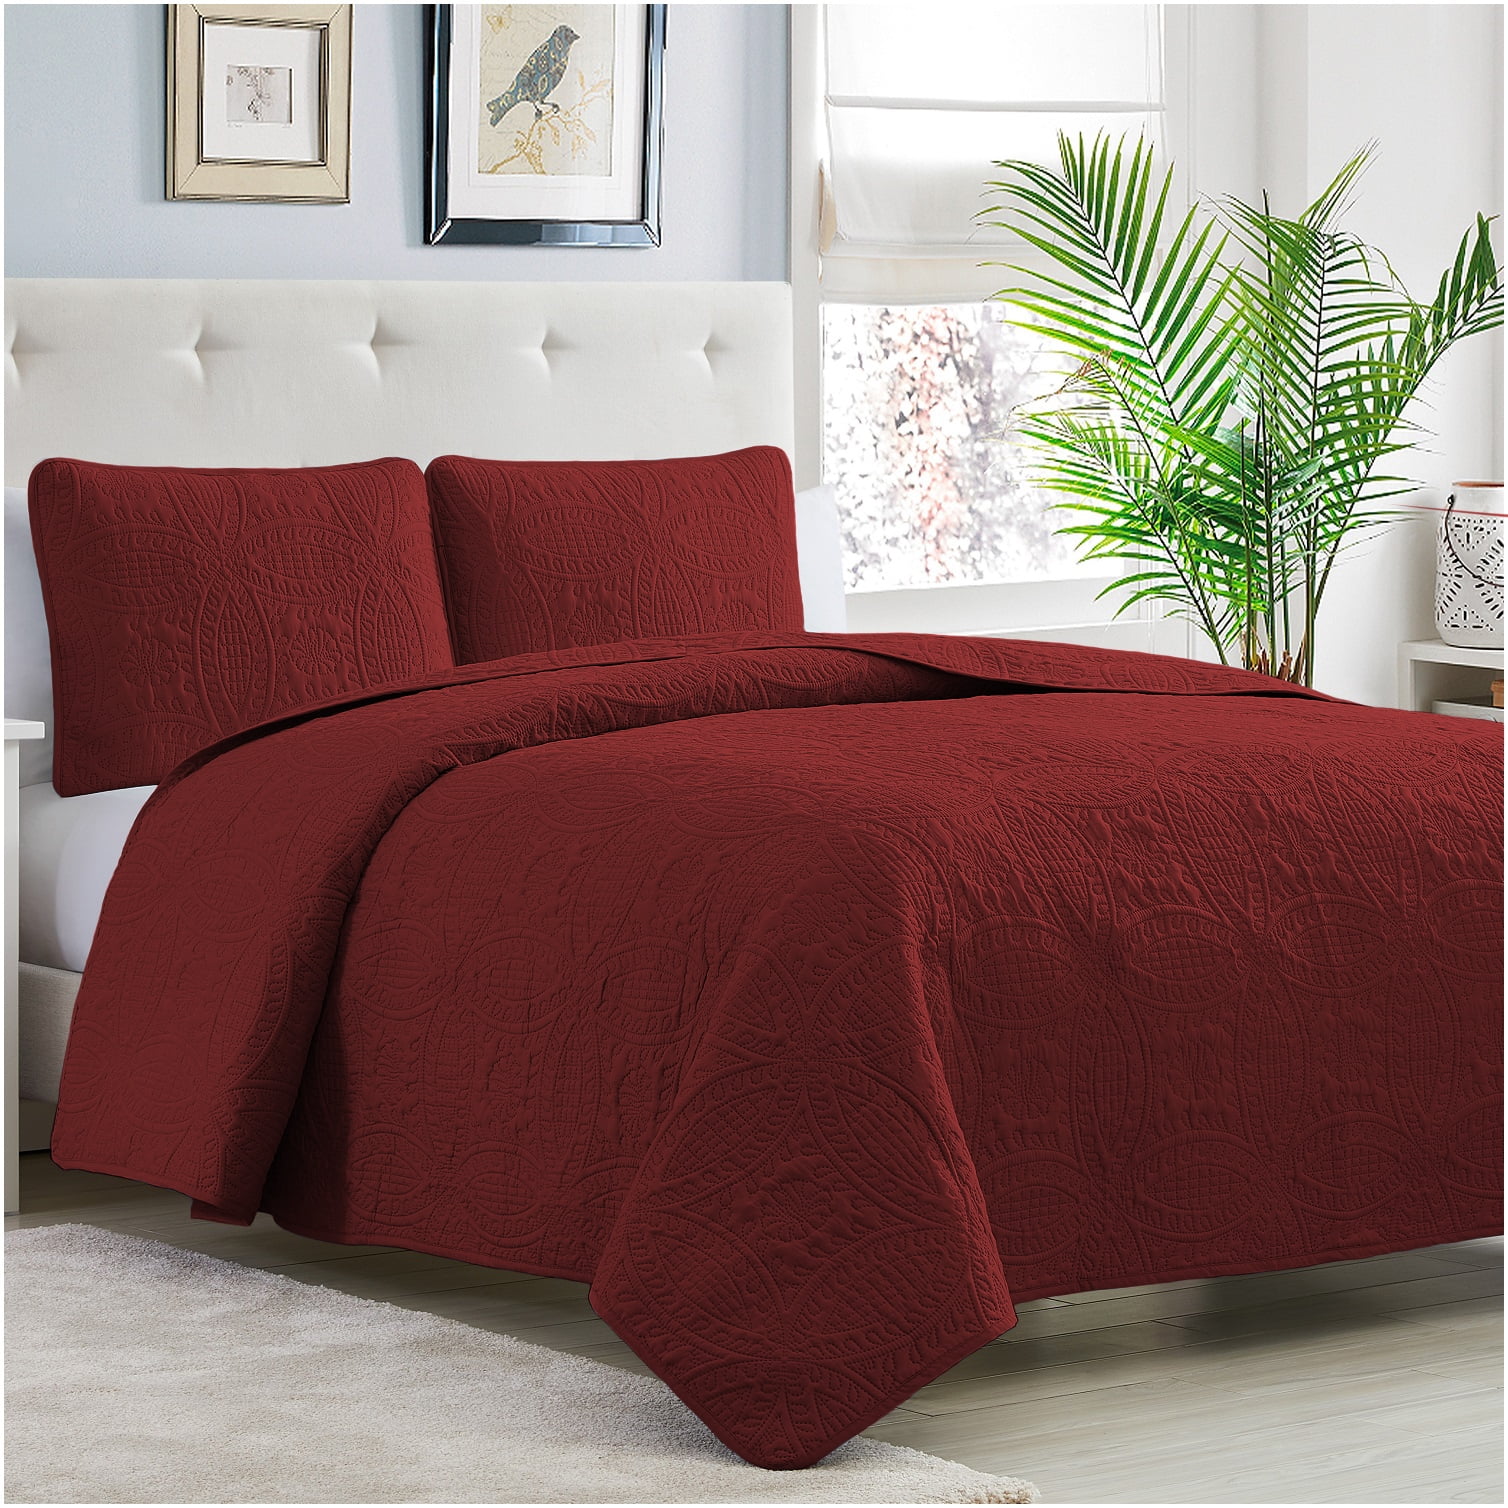 Details about   Solid Pattern Bedding Collection Gray US Sizes Choose Item & Depth Pocket 